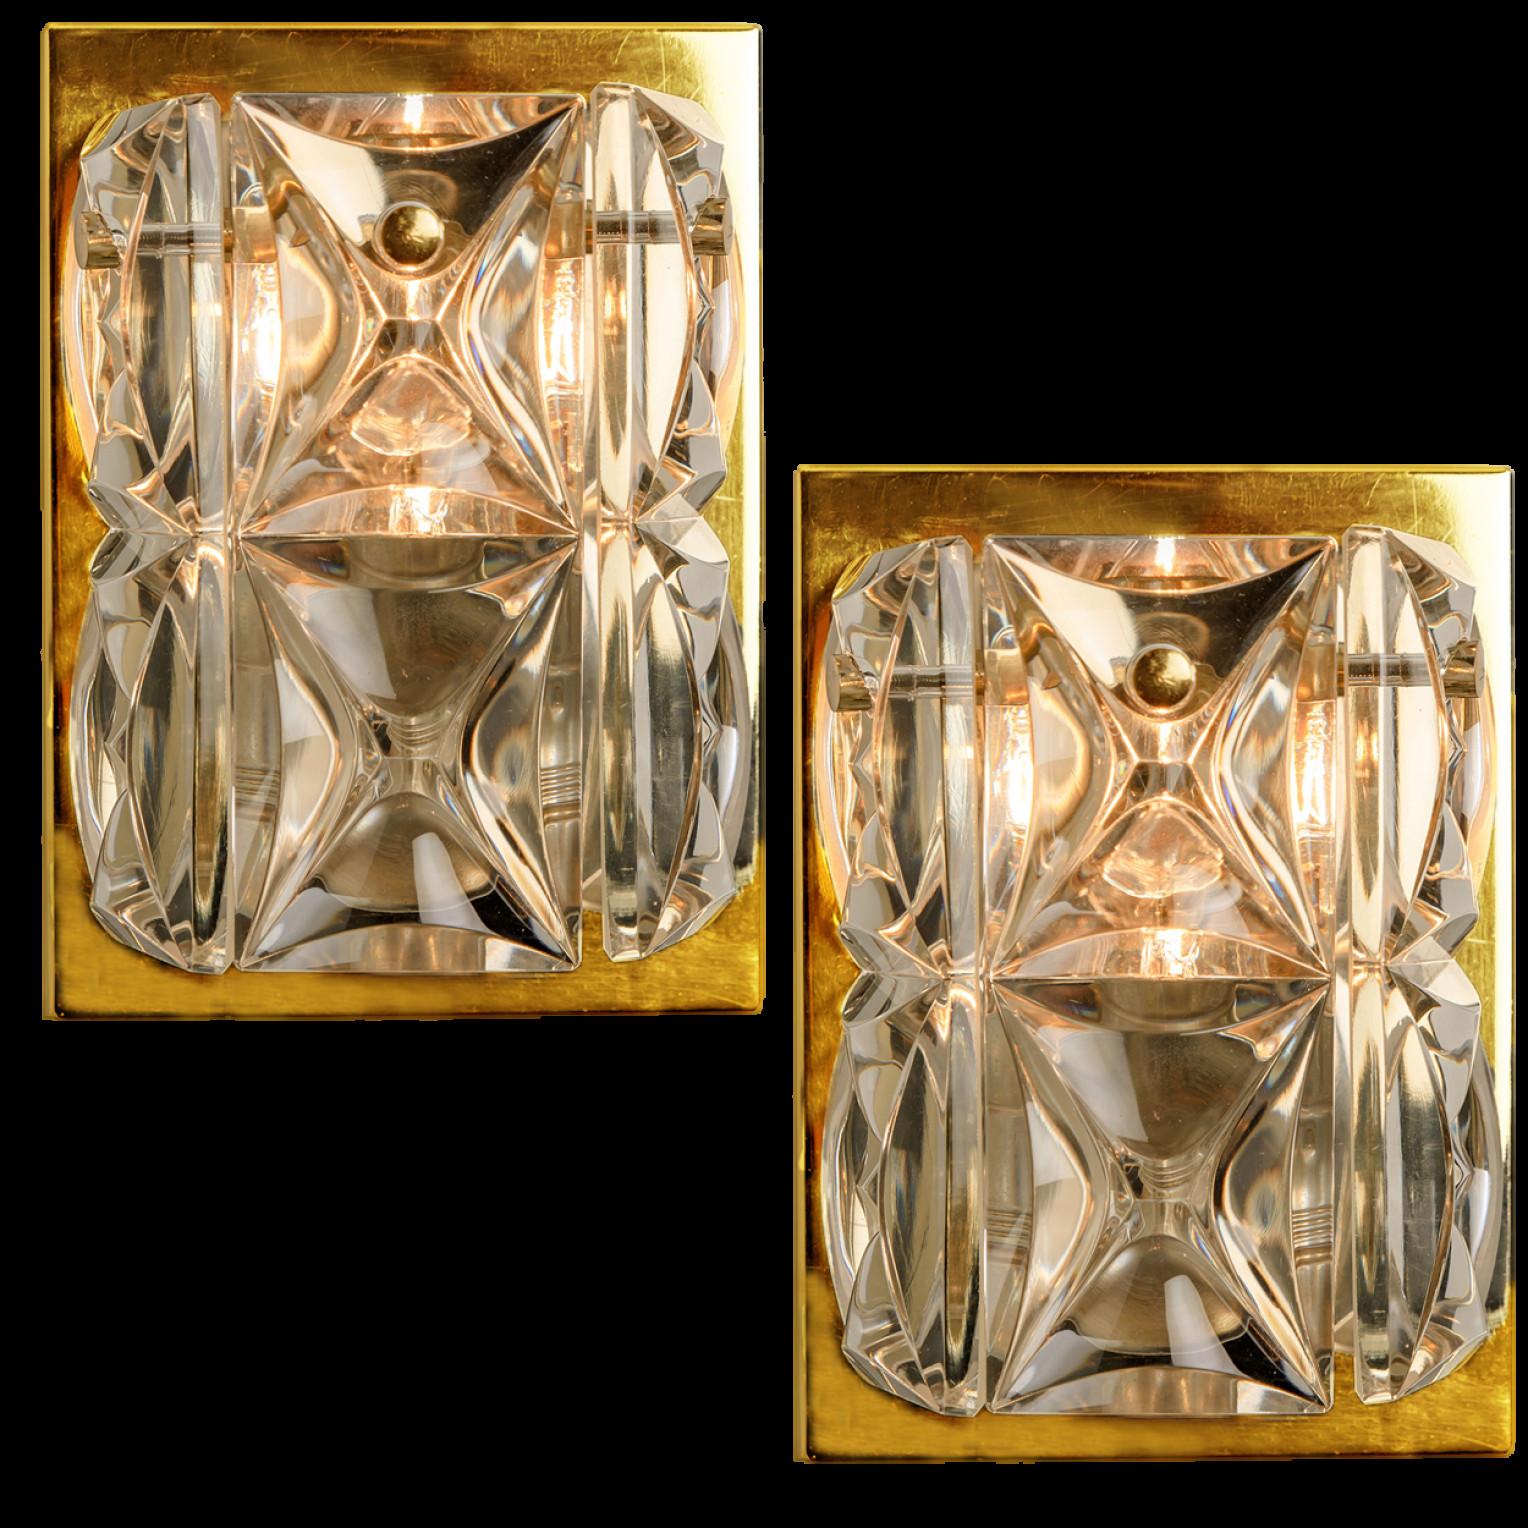 A pair of wall light fixtures by Kinkeldey, Germany, manufactured in the midcentury, circa 1970 (late 1960s or early 1970s). The wall lights are executed to a very high standard. The large square crystals reflect the light beautifully. These